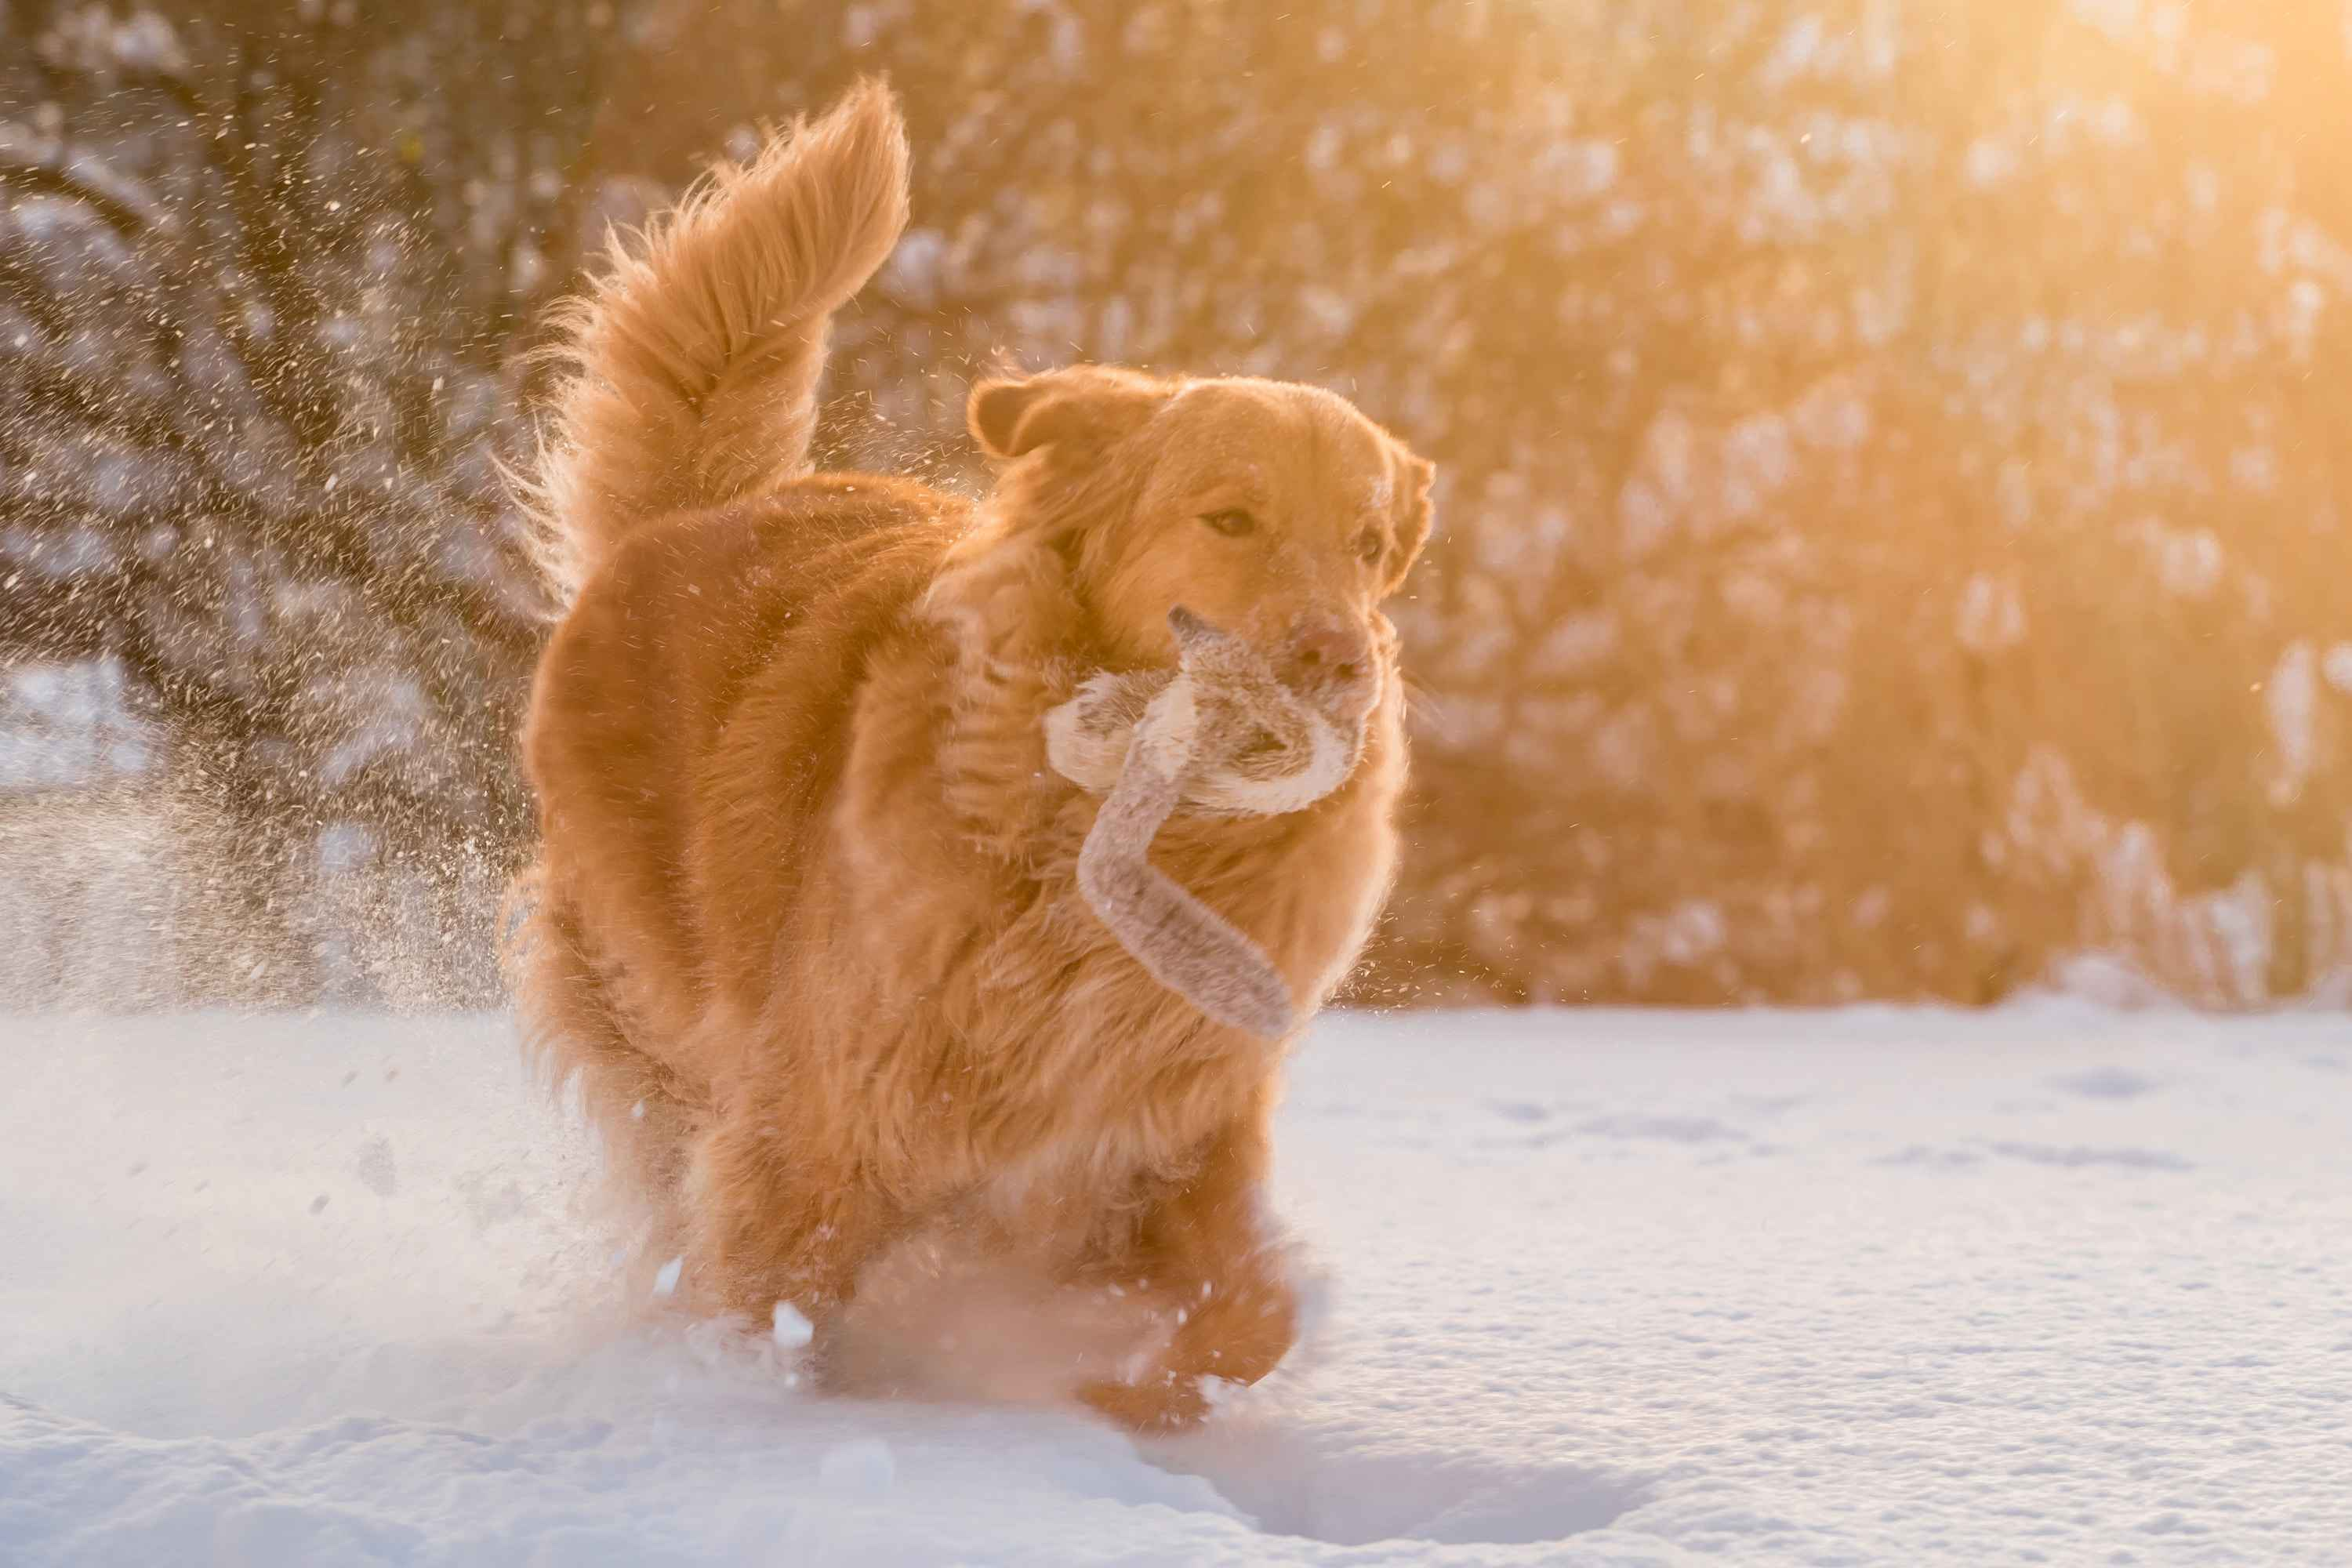 5 Effective Tips for Safely Managing Your Golden Retriever Puppy's Fear of Loud Noises and Fireworks